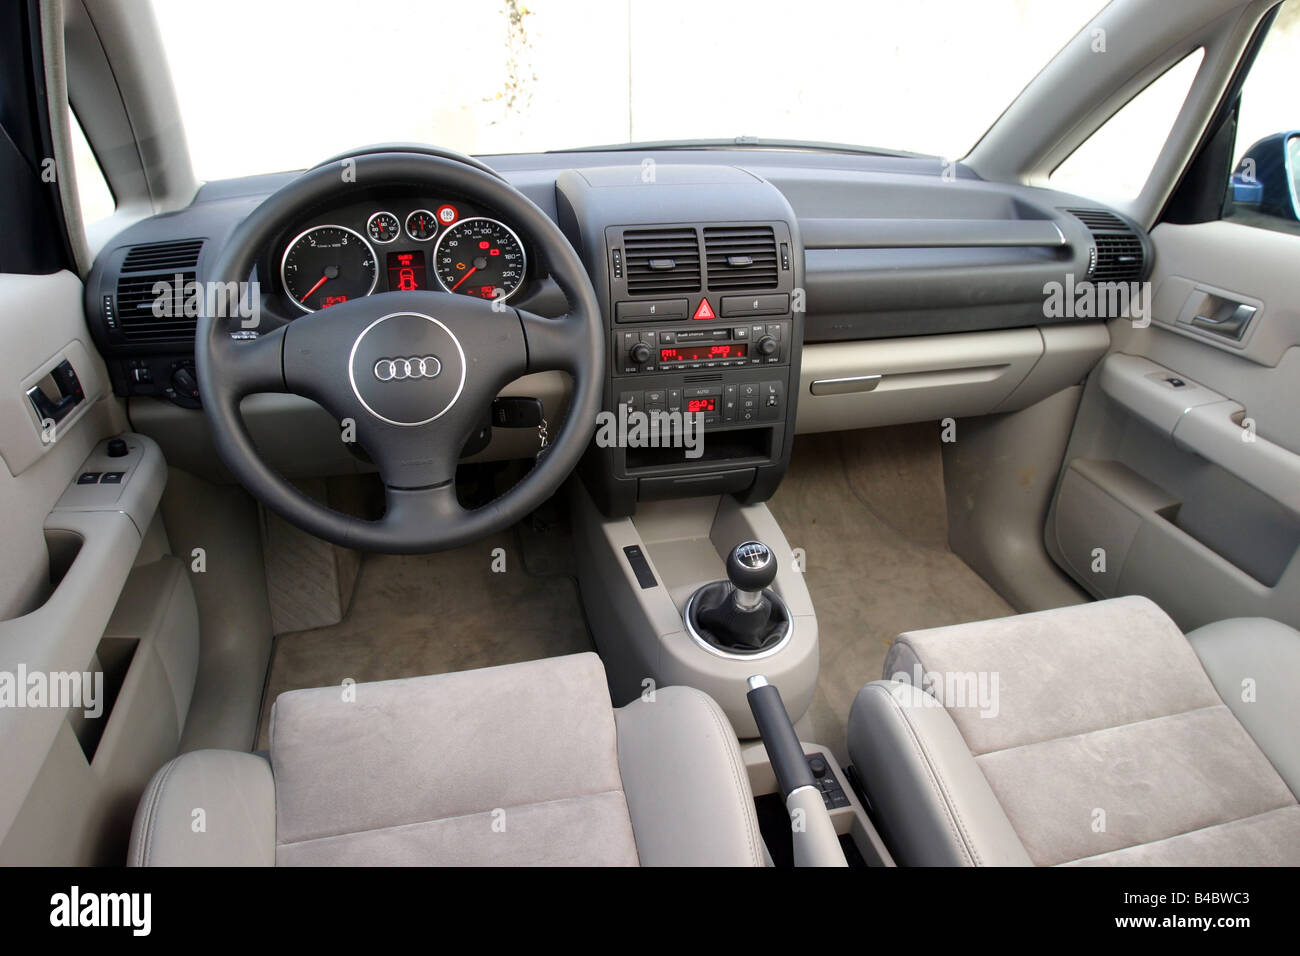 Car, Audi A2 1.4 TDI, Limousine, Lower middle-sized class, model year 2003-, blue, interior view, Interior view, Cockpit, techni Stock Photo